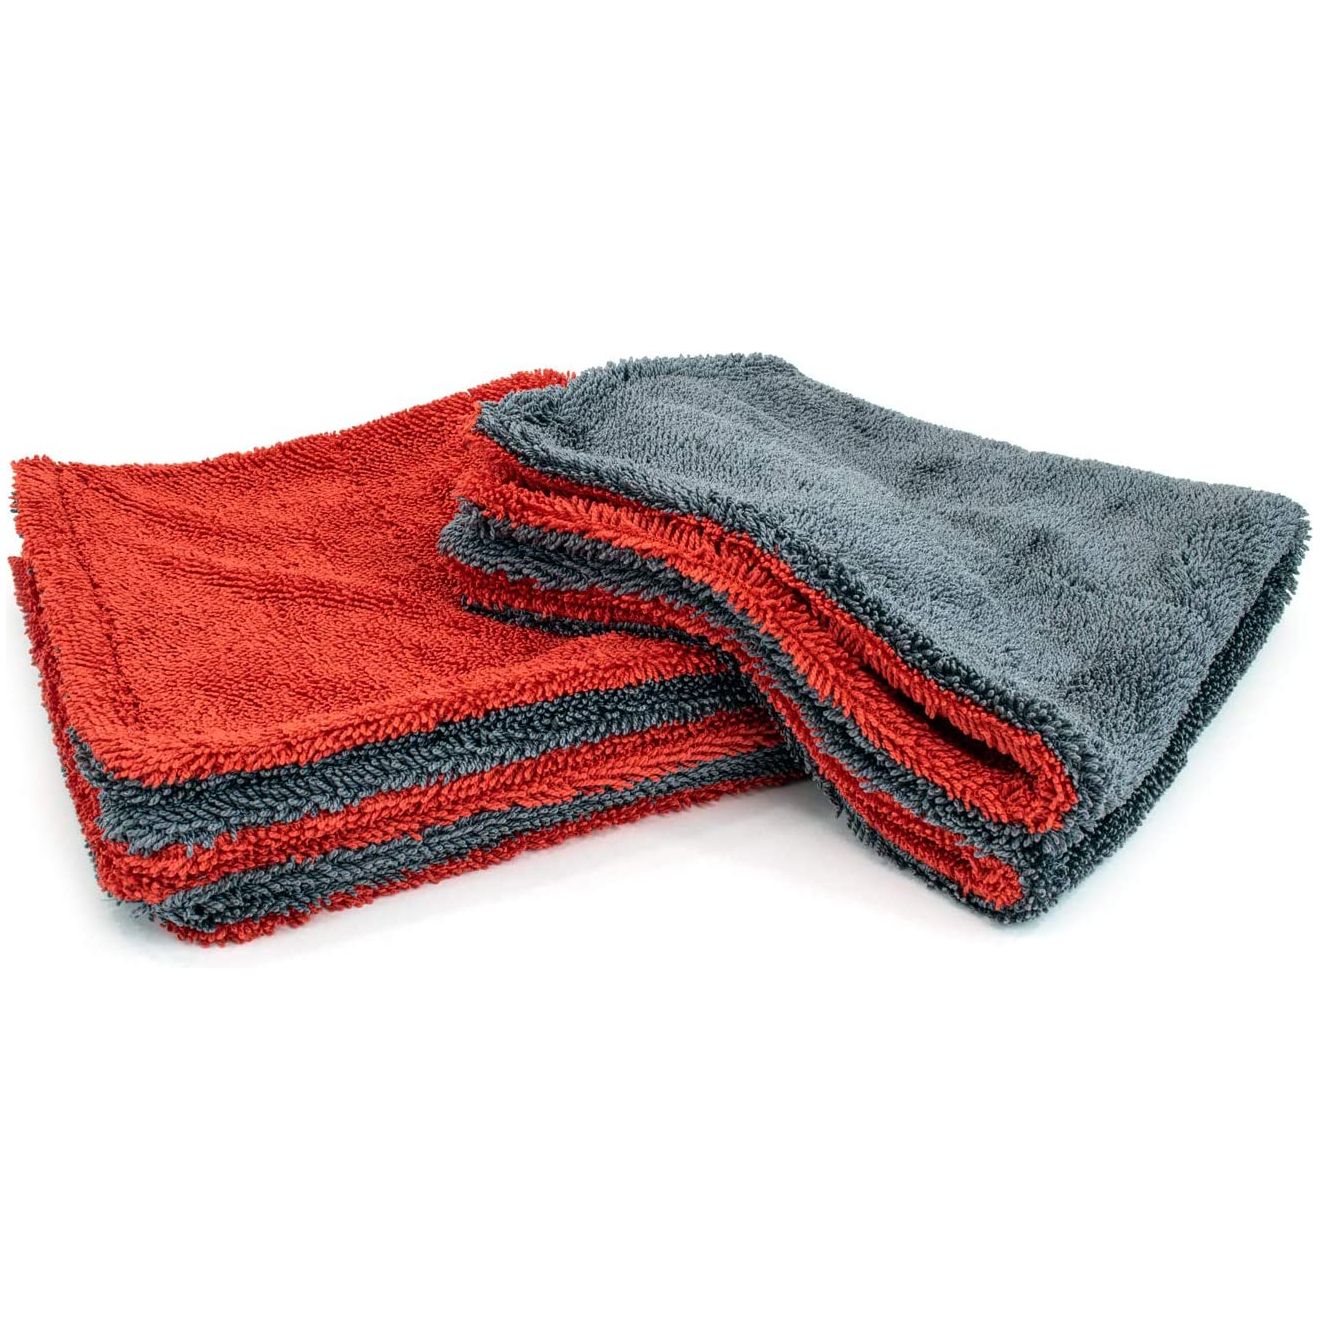 Auto Drive Absorbent Microfiber Car Wash Towels for Waterless Wash